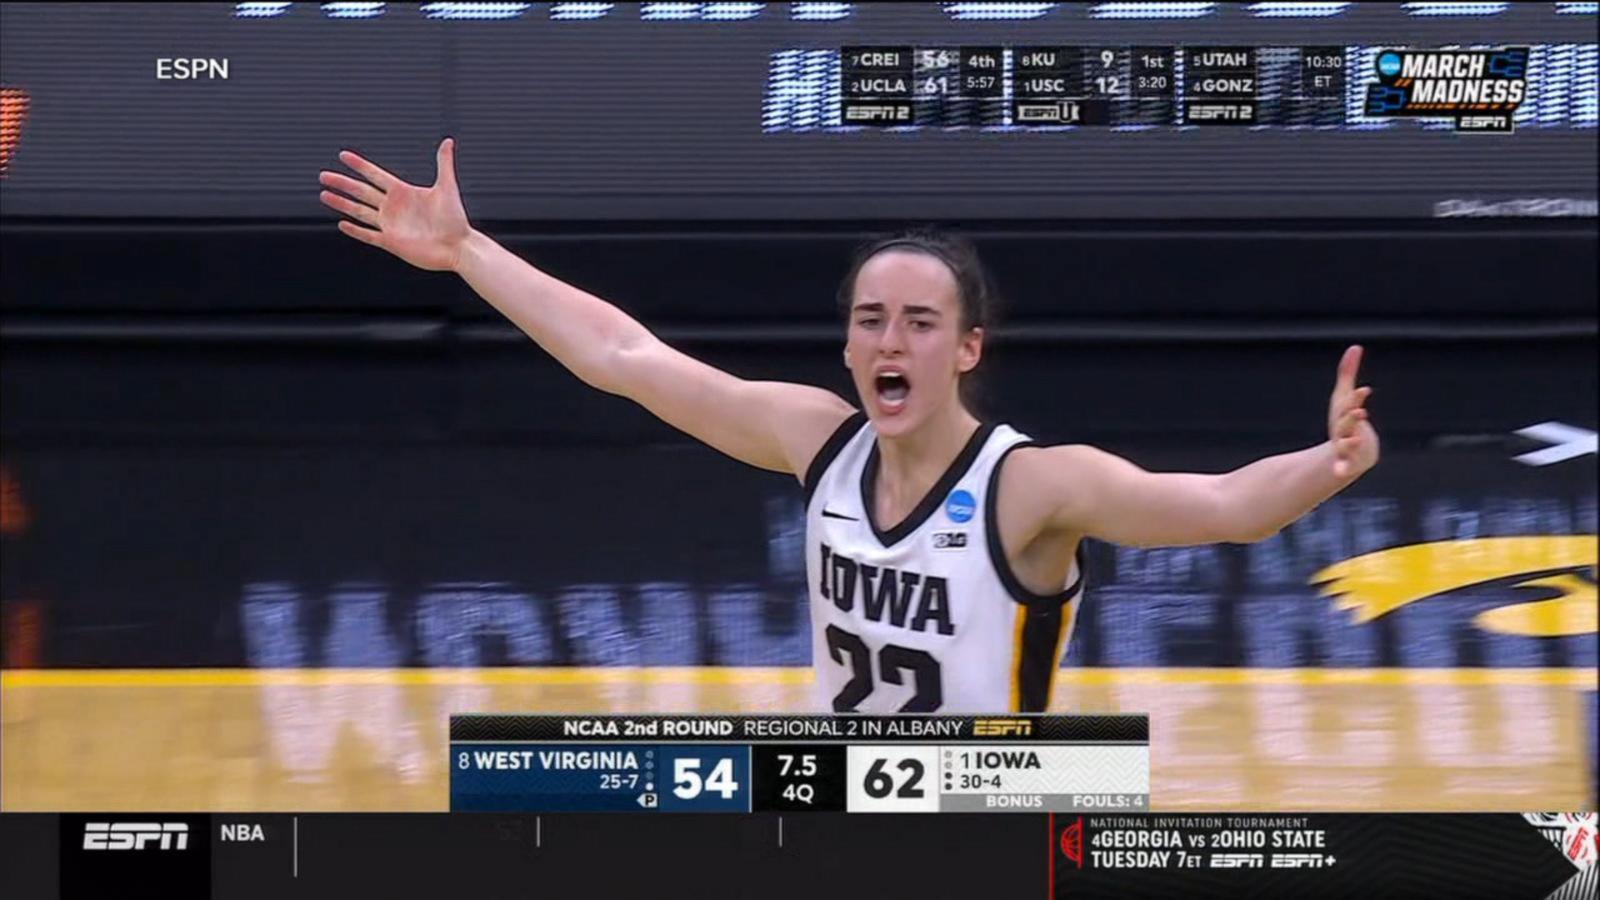 VIDEO: Iowa advances to Women’s Sweet 16 in March Madness